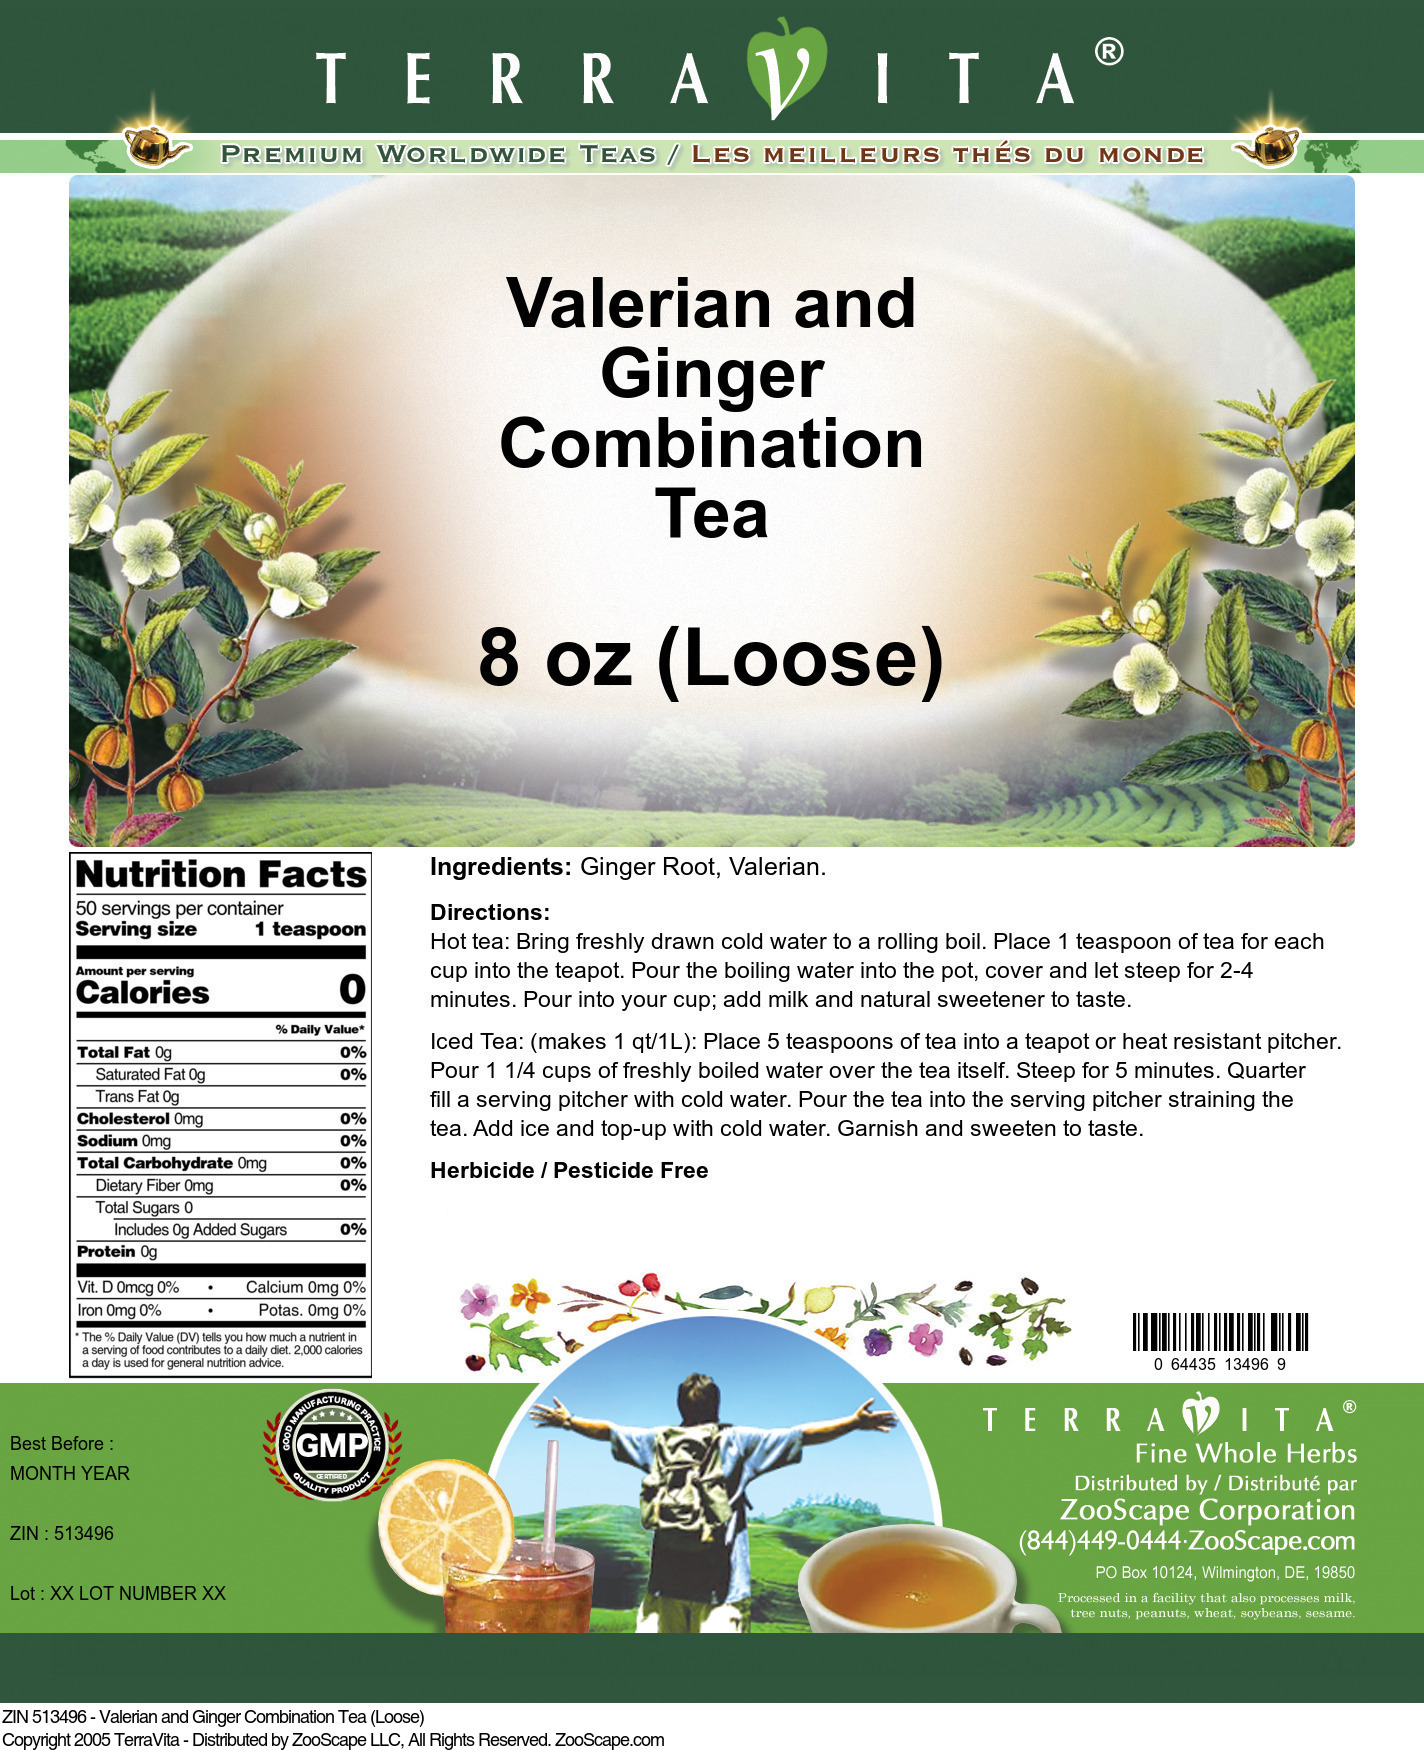 Valerian and Ginger Combination Tea (Loose) - Label